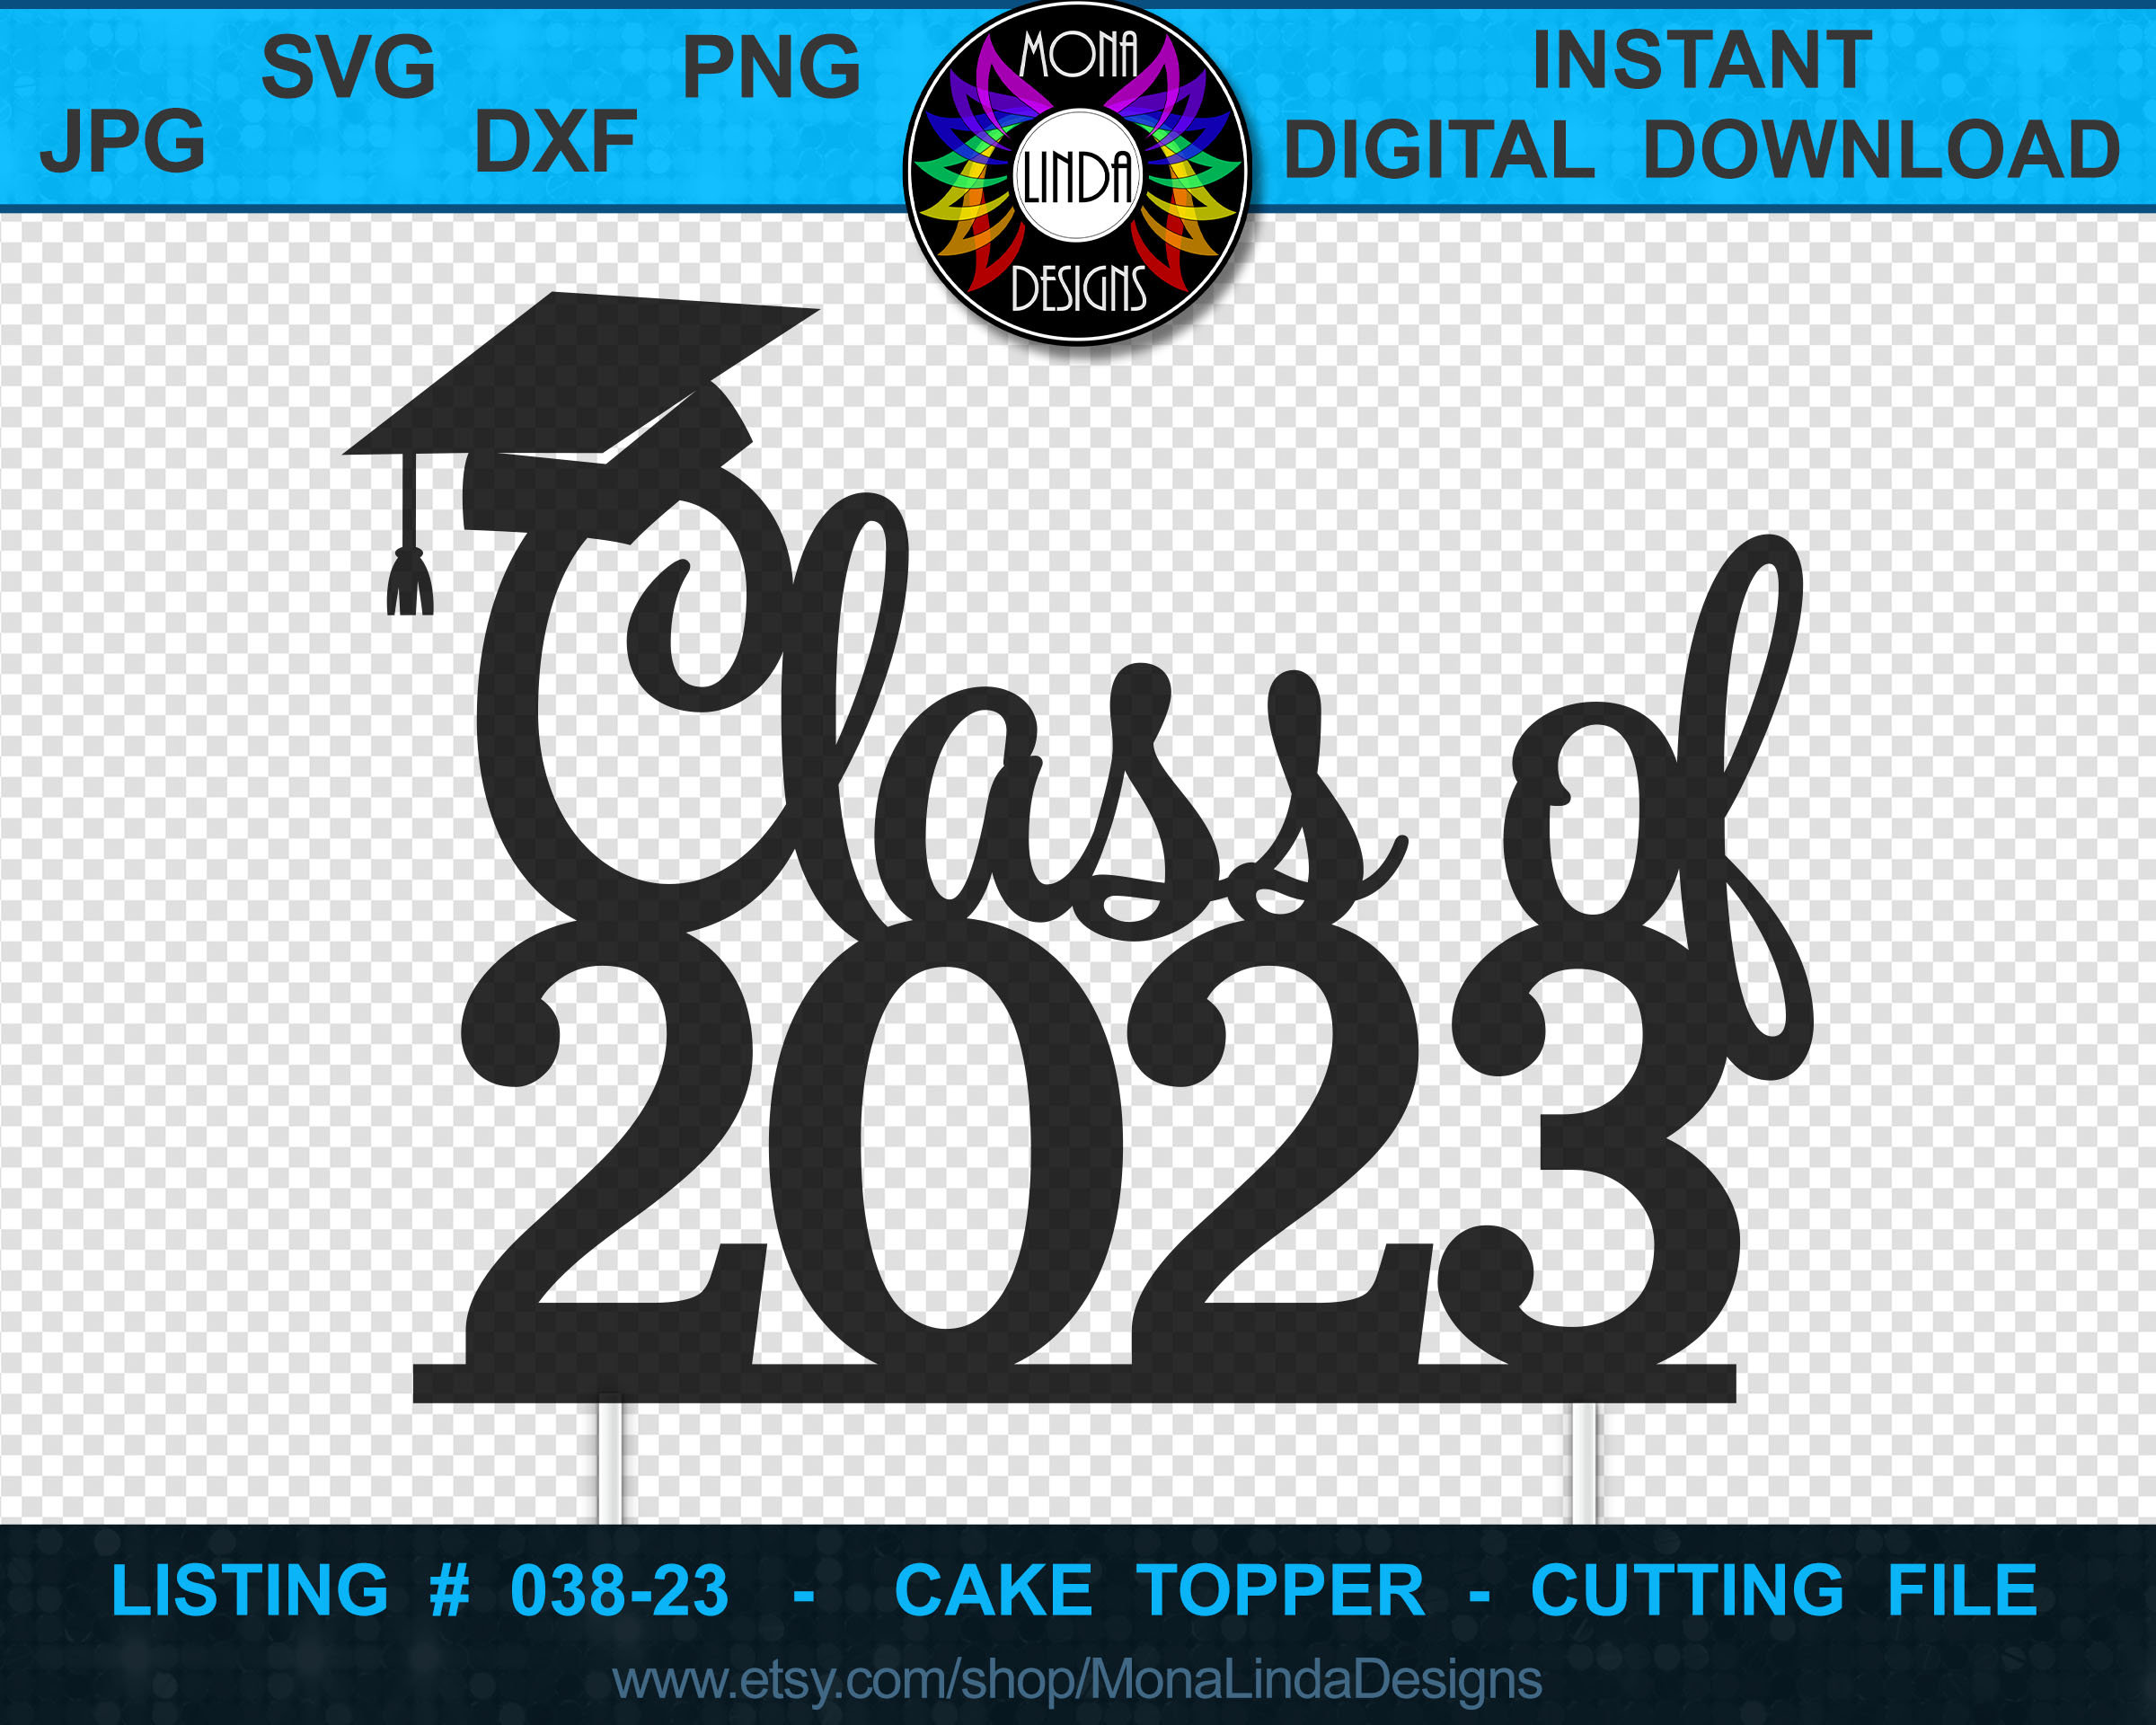 cake-topper-class-of-2023-svg-png-dxf-cutting-file-etsy-hong-kong